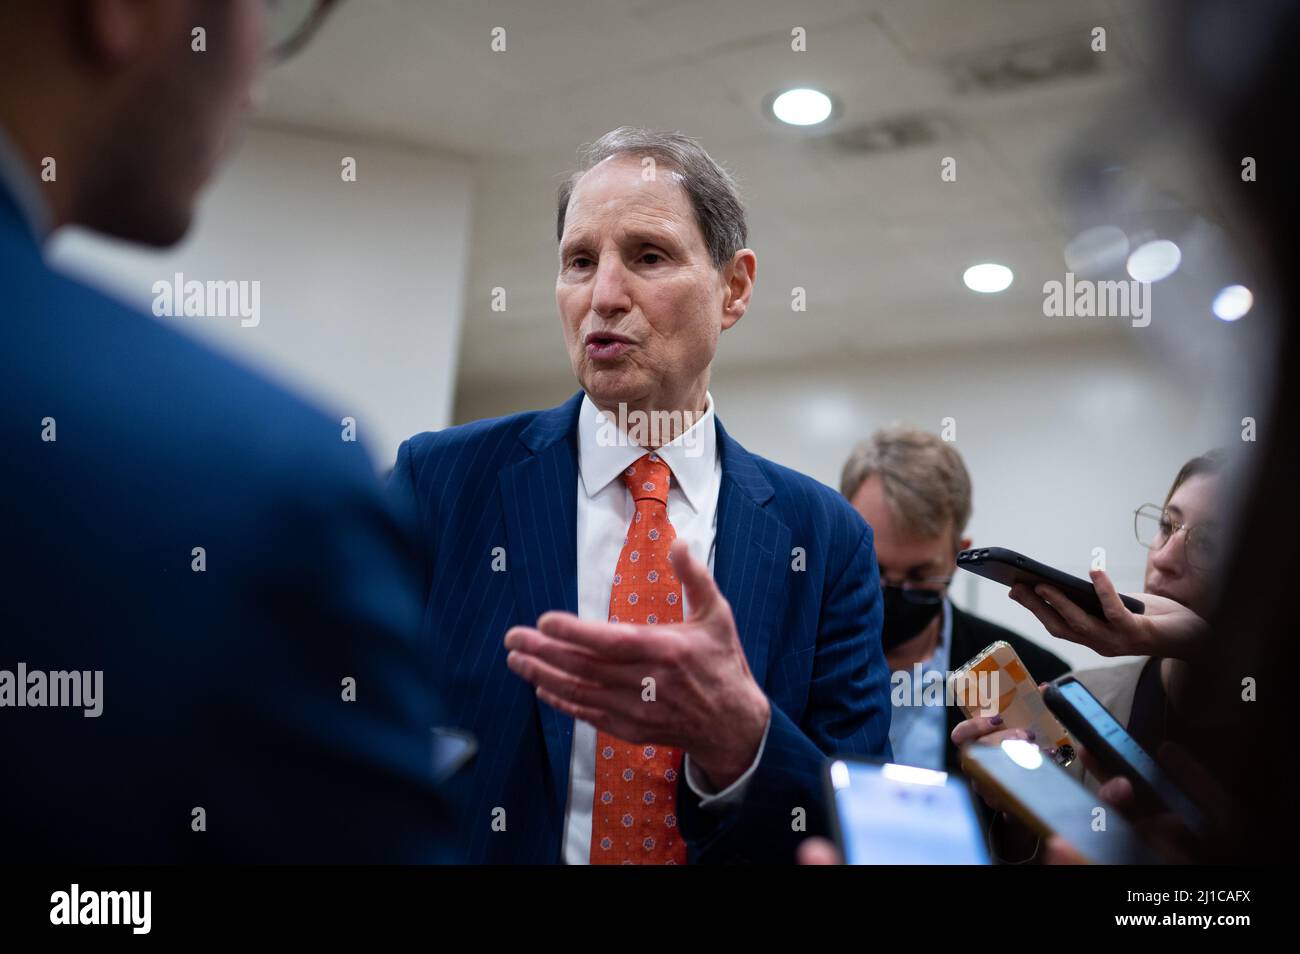 Washington, USA. 24th Mar, 2022. Senator Ron Wyden (D-OR) speaks to media in the Senate Subway at the U.S. Capitol, in Washington, DC, on Thursday, March 24, 2022. Republicans grilled President Joe Biden's nominee to the Supreme Court Judge Kentanji Brown Jackson during two days of questioning this week, accusing her of being soft on crime and demanding additional information from the White House. (Graeme Sloan/Sipa USA) Credit: Sipa USA/Alamy Live News Stock Photo